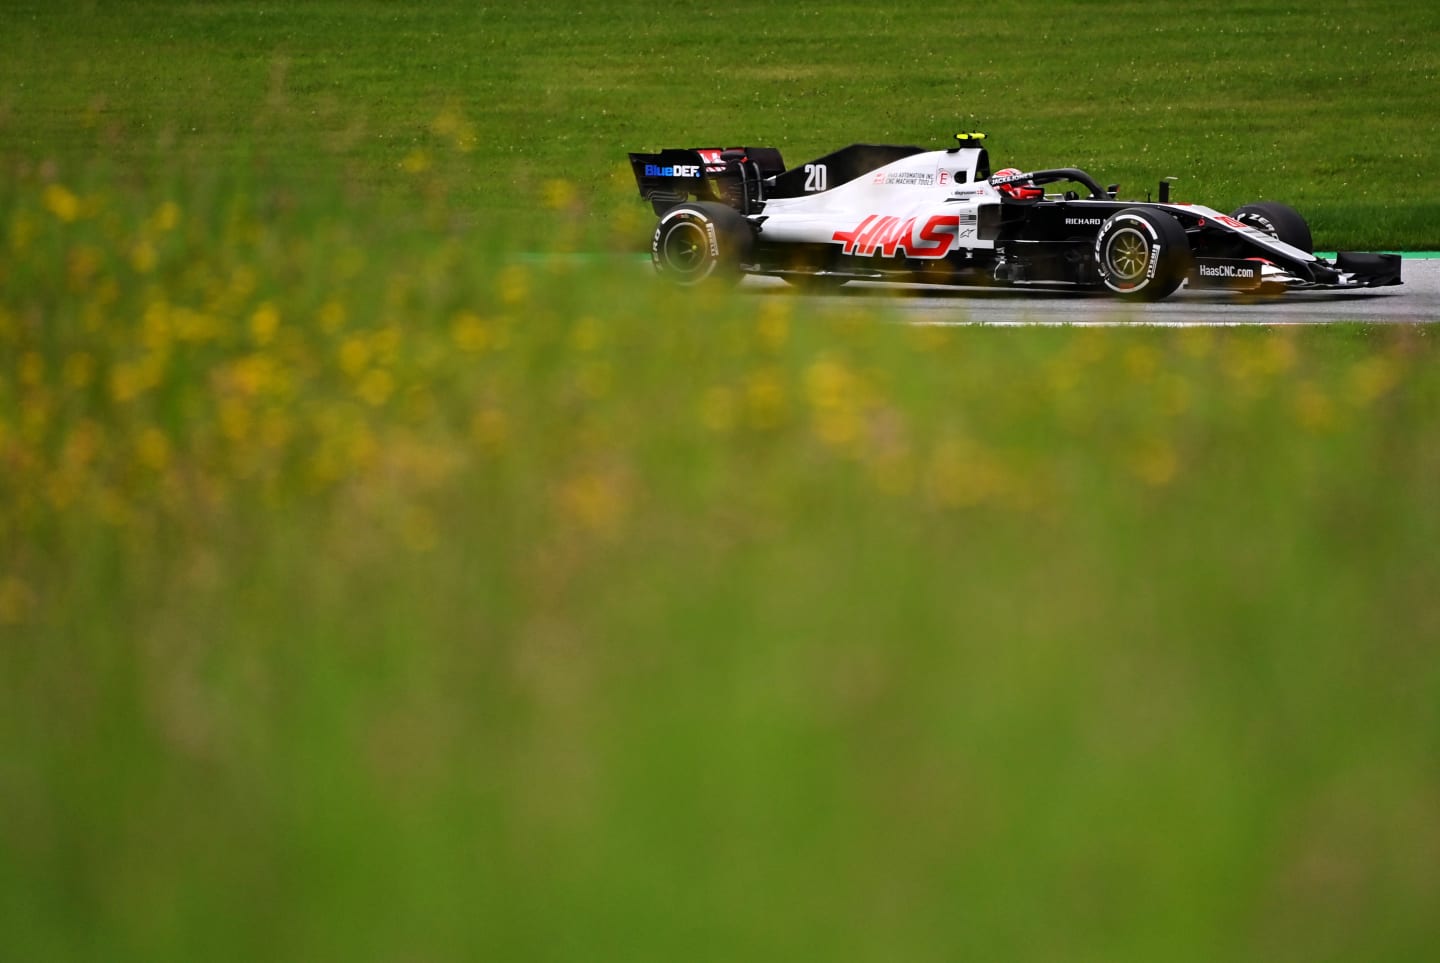 SPIELBERG, AUSTRIA - JULY 03: Kevin Magnussen of Denmark driving the (20) Haas F1 Team VF-20 Ferrari on track during practice for the F1 Grand Prix of Austria at Red Bull Ring on July 03, 2020 in Spielberg, Austria. (Photo by Joe Klamar/Pool via Getty Images)